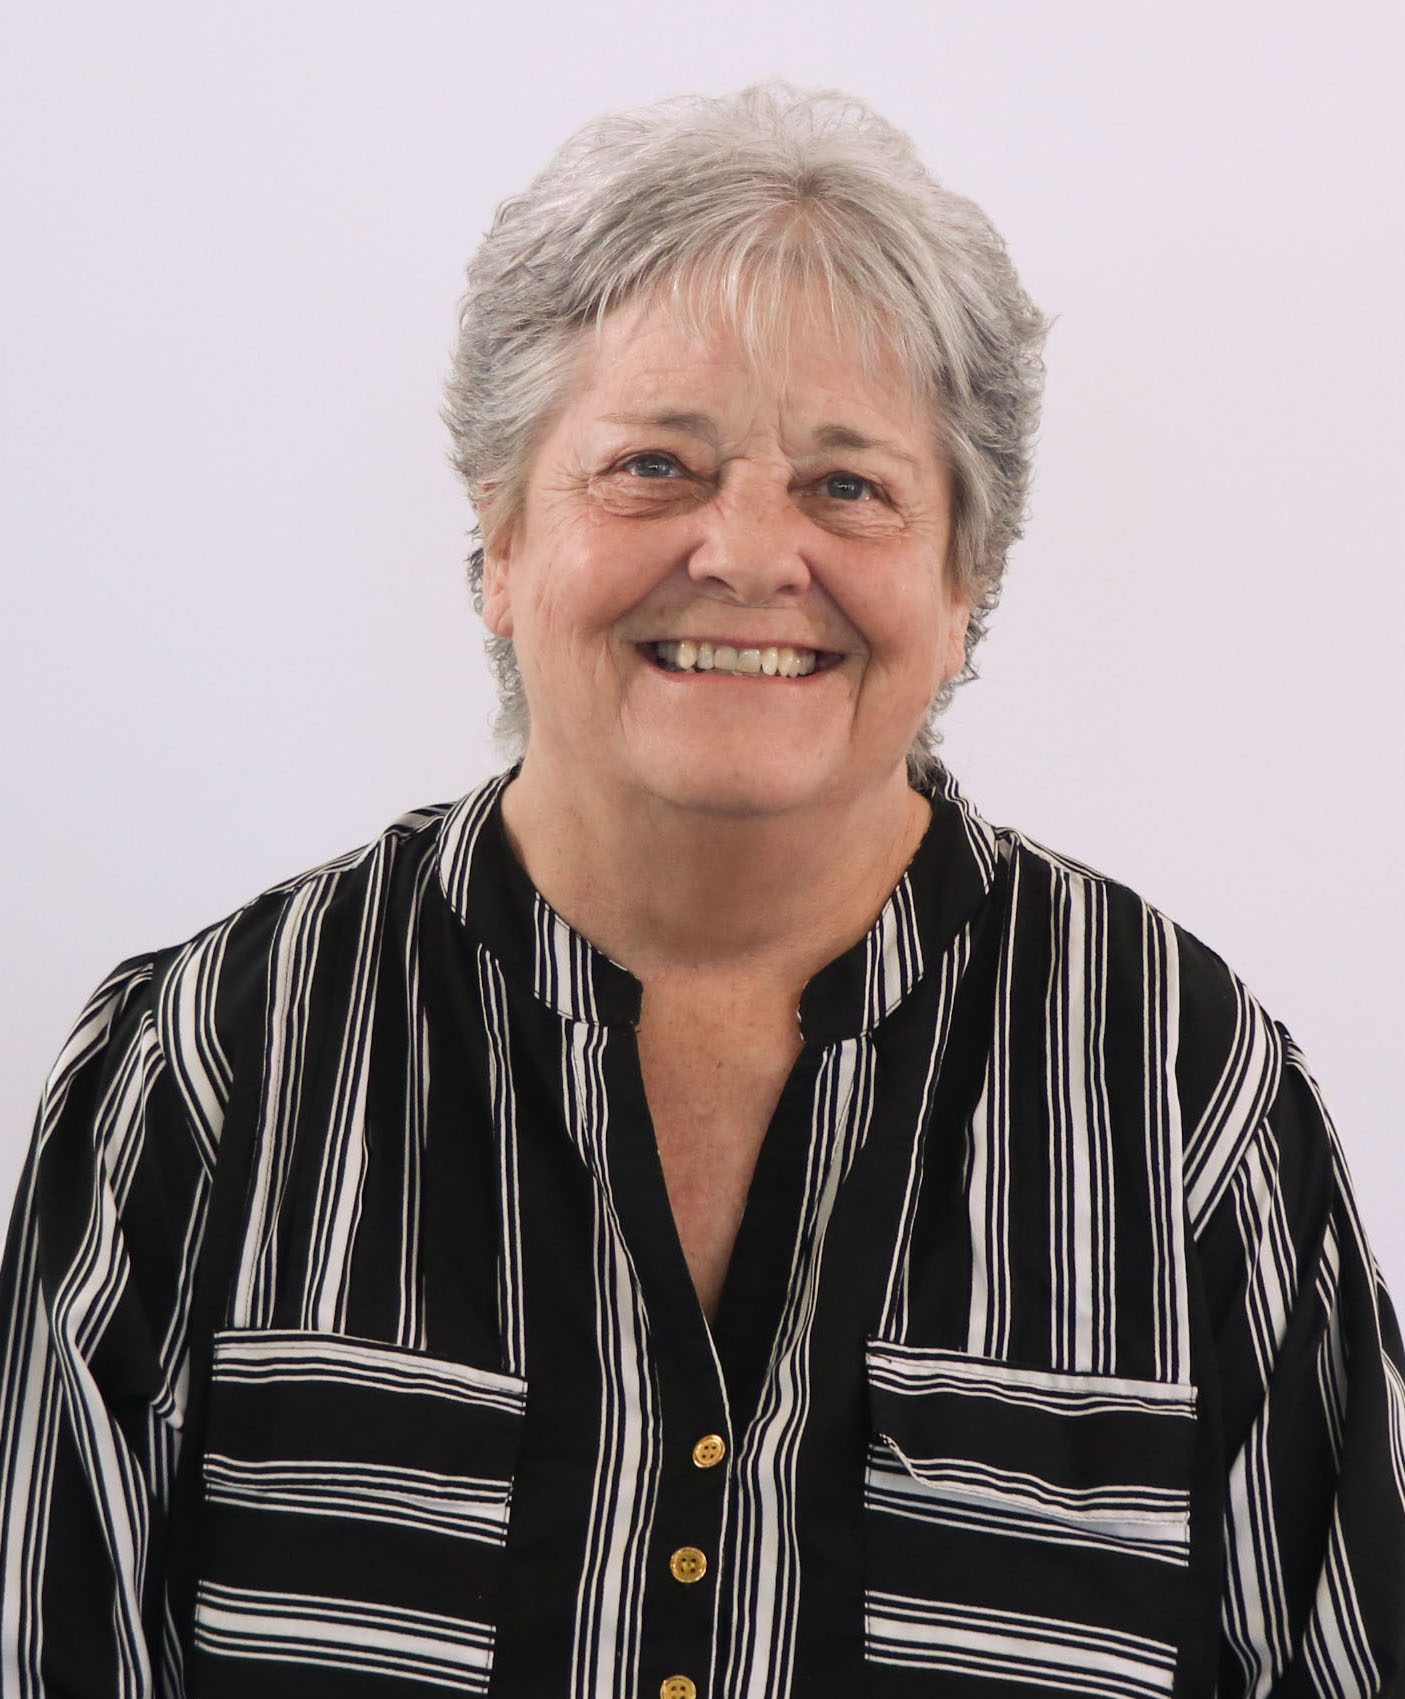 woman with short grey hair wearing a black and white stripe shirt